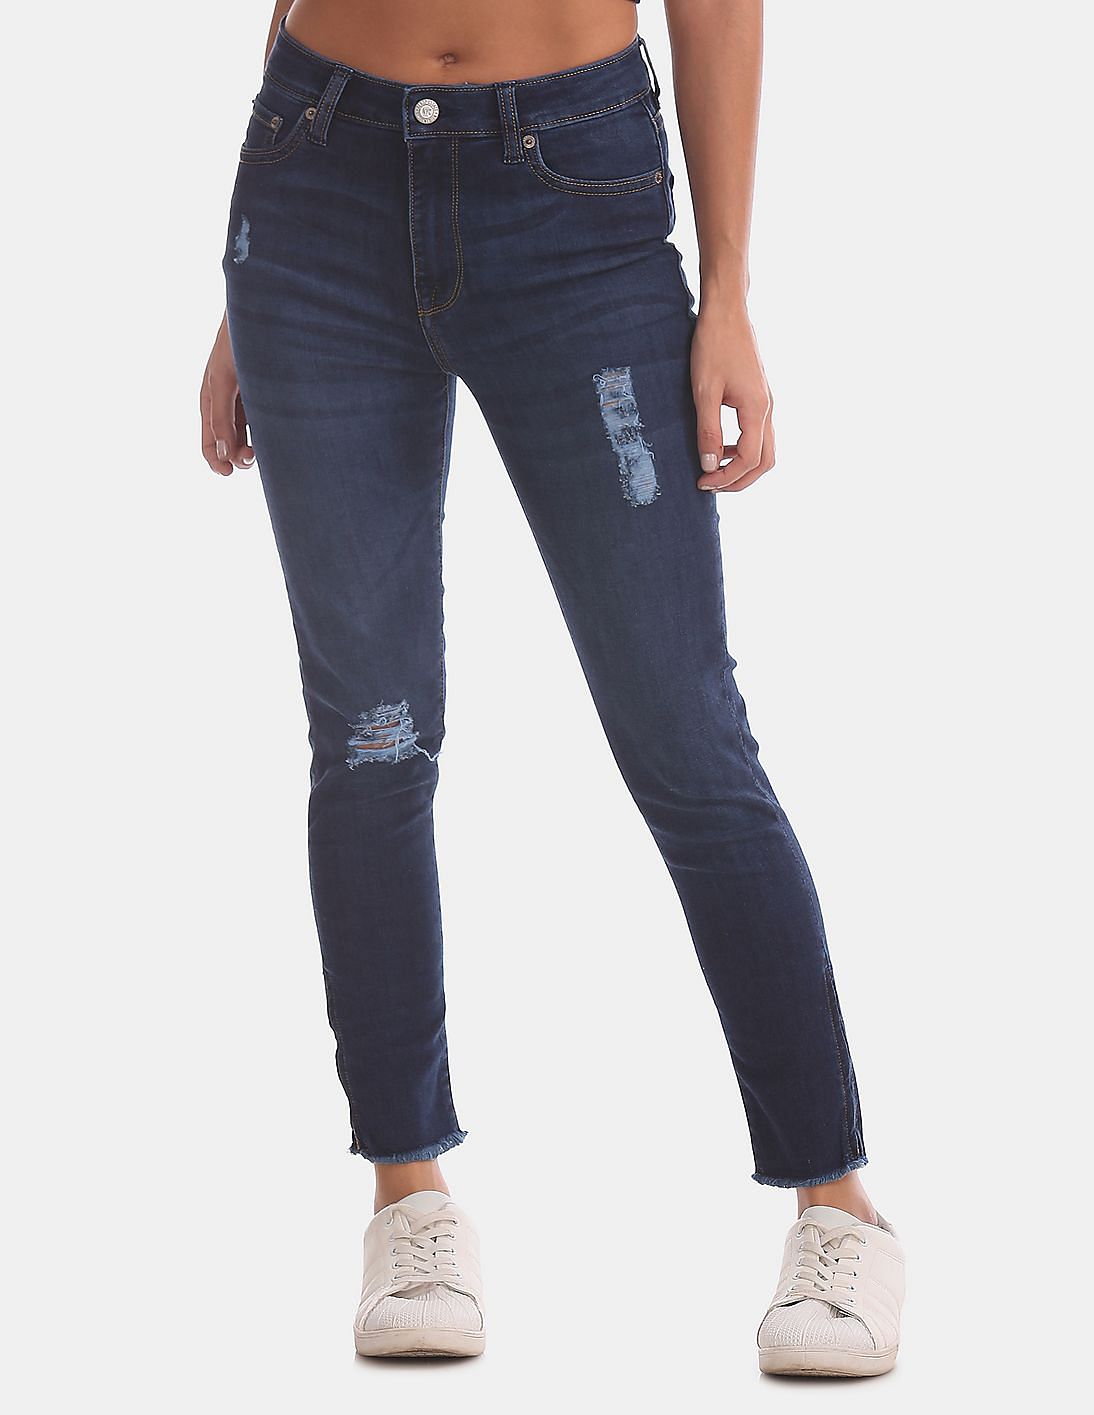 best ankle length jeans